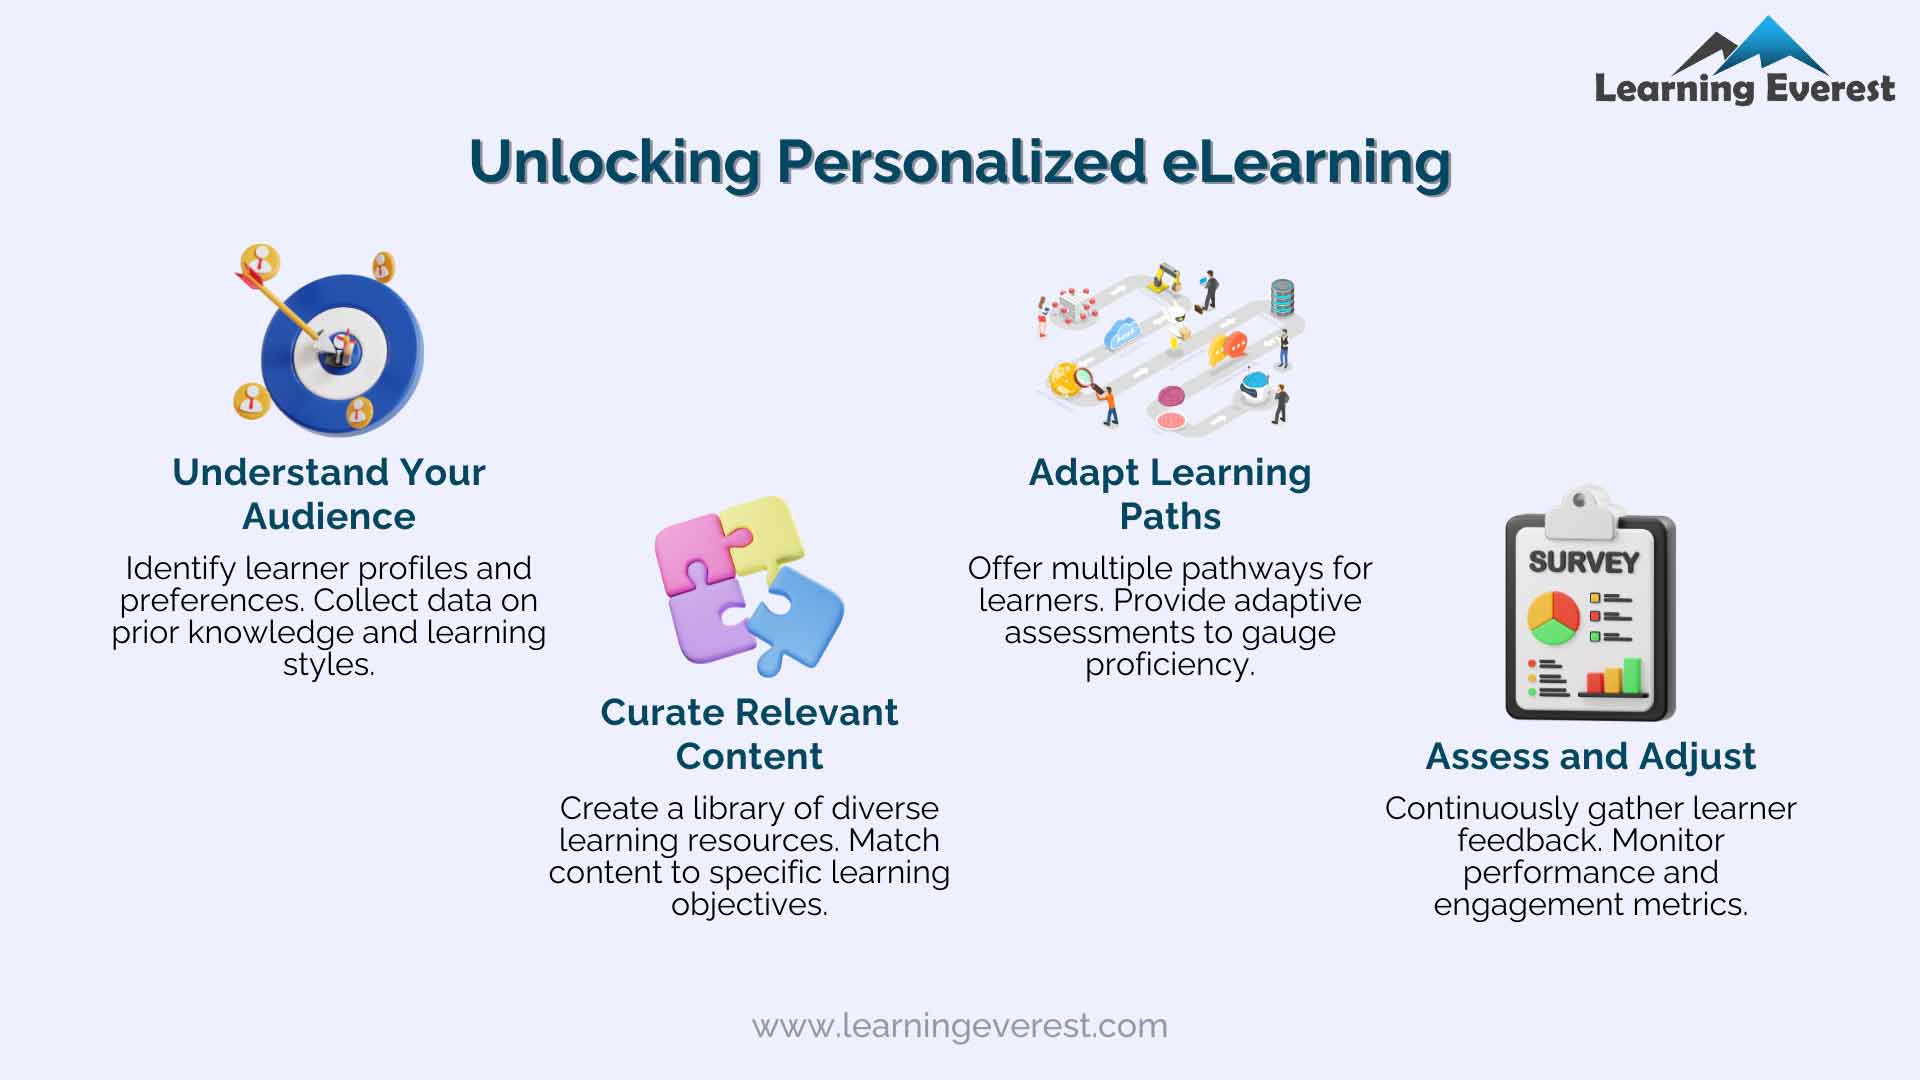 Requirements for eLearning - Personalization and Adaptability